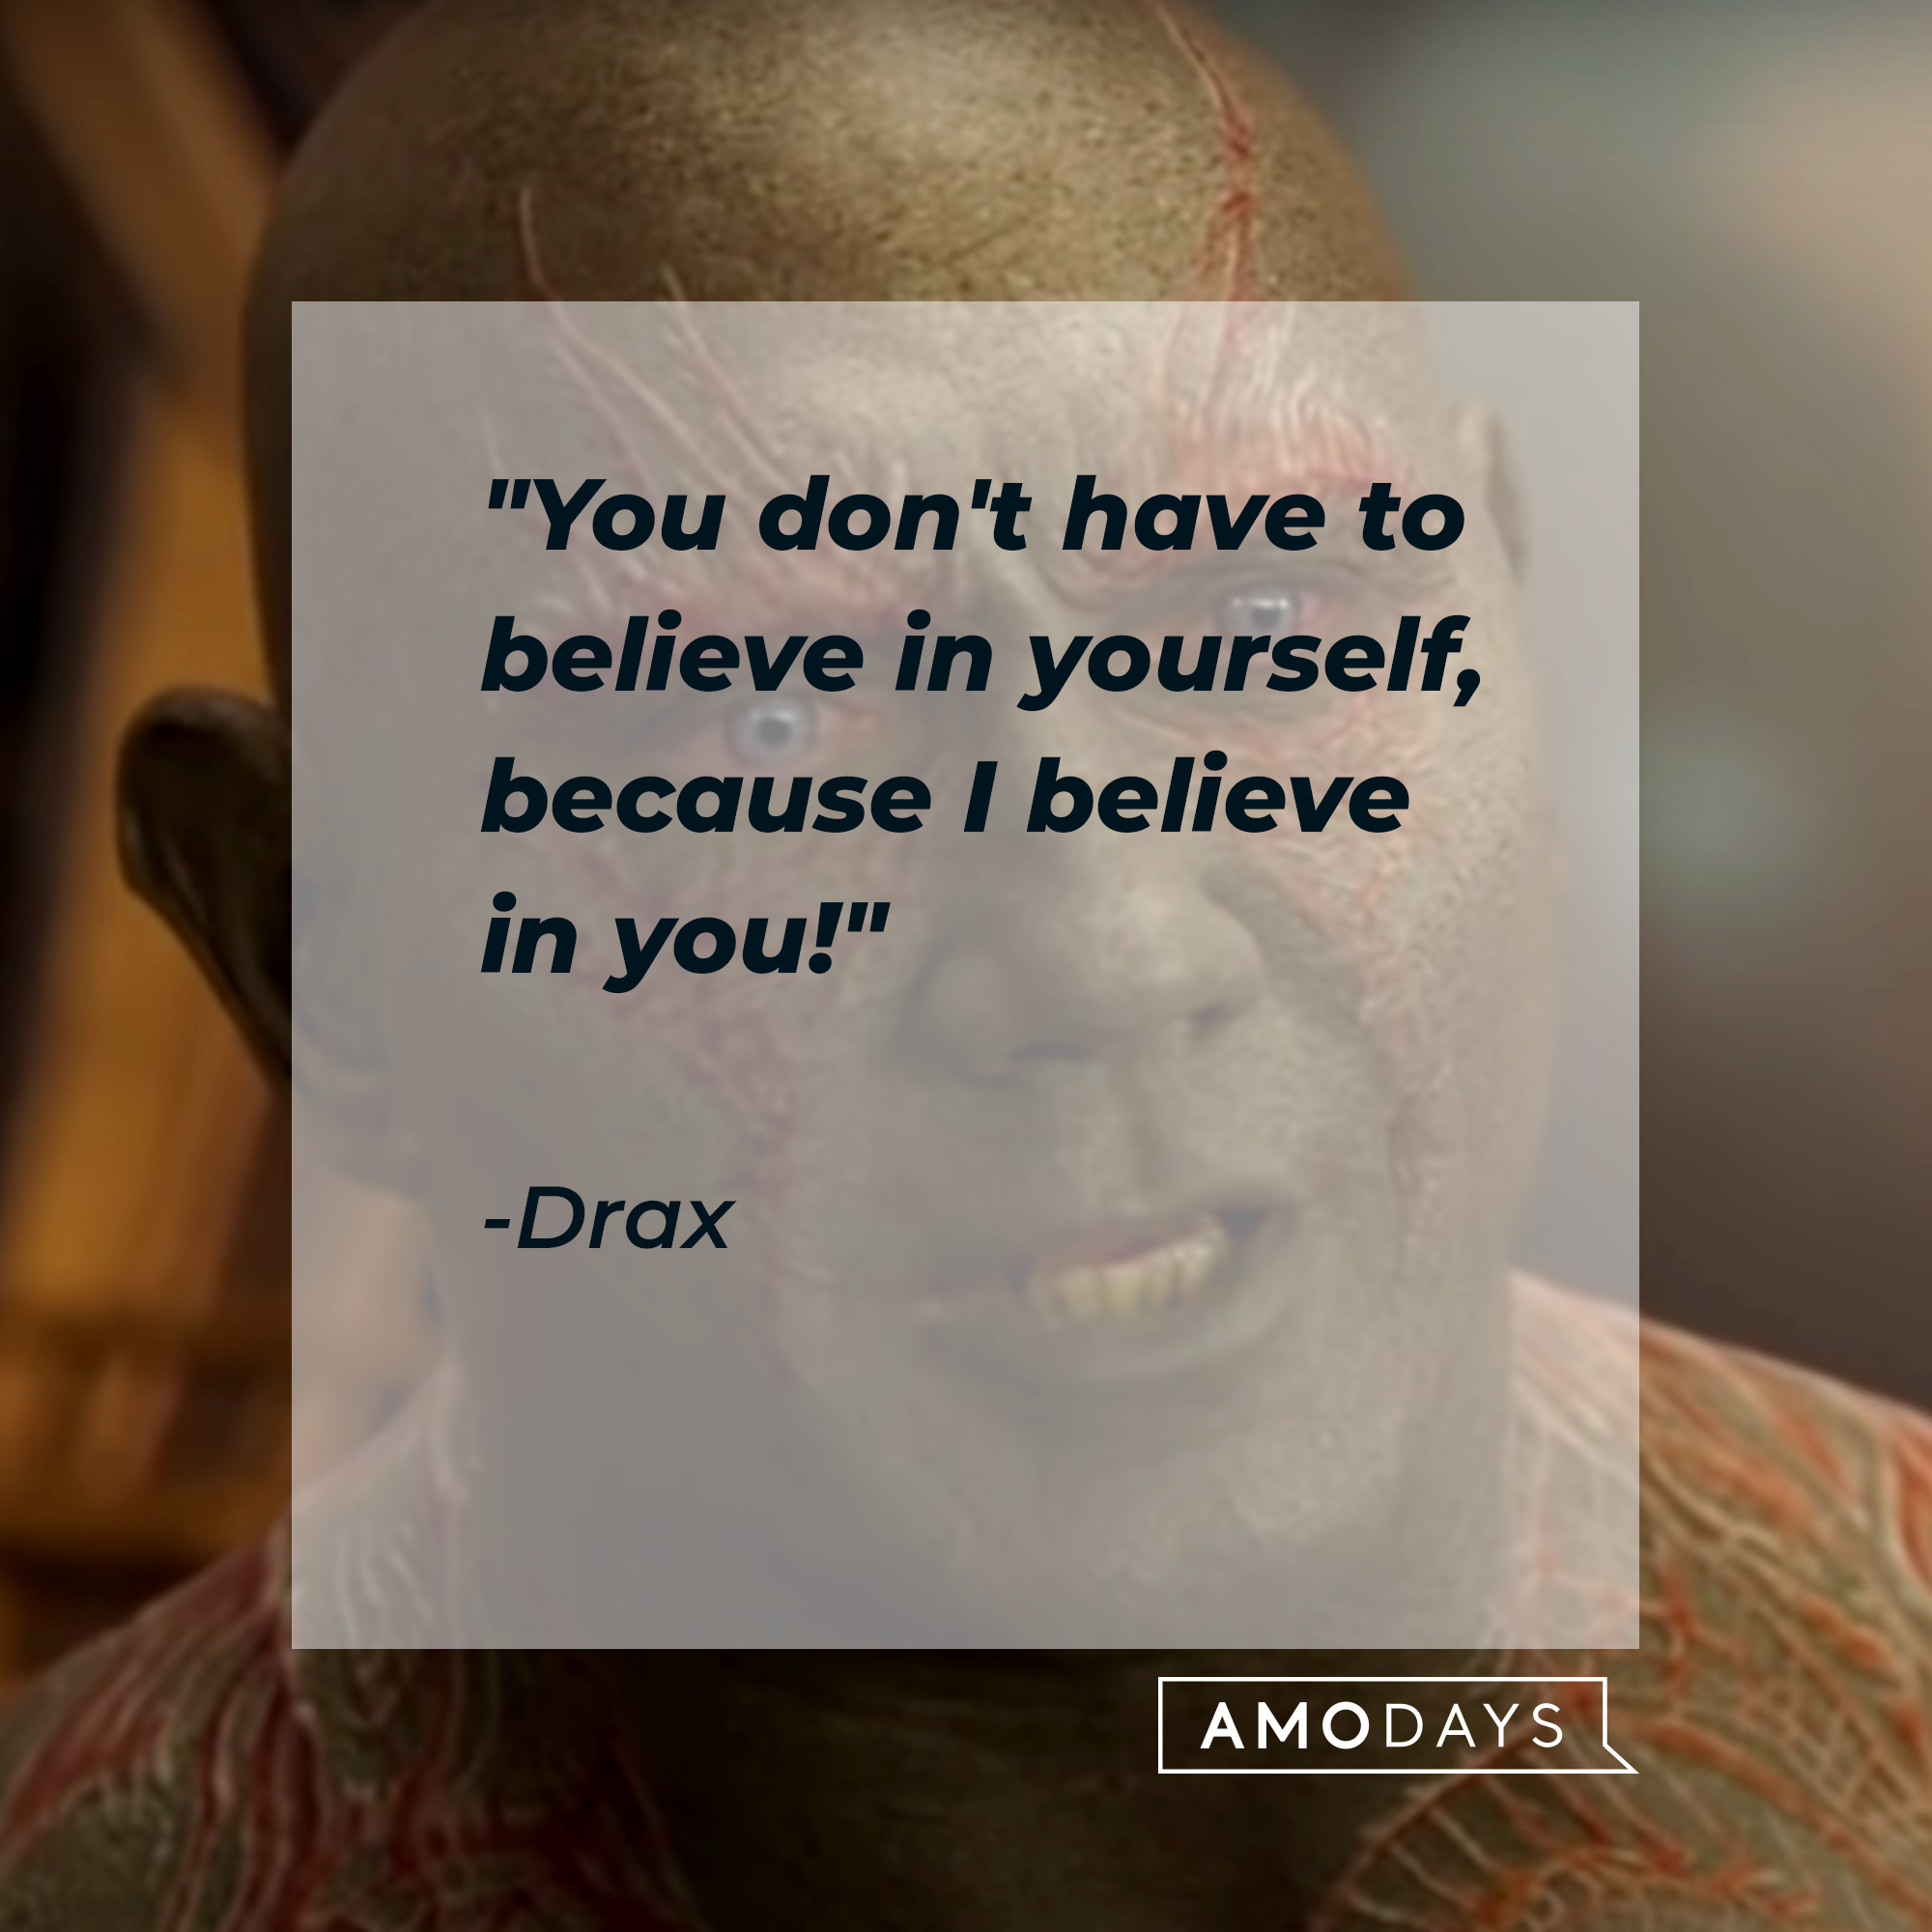 Drax's quote, "You don't have to believe in yourself, because I believe in you!" | Image: youtube.com/marvel